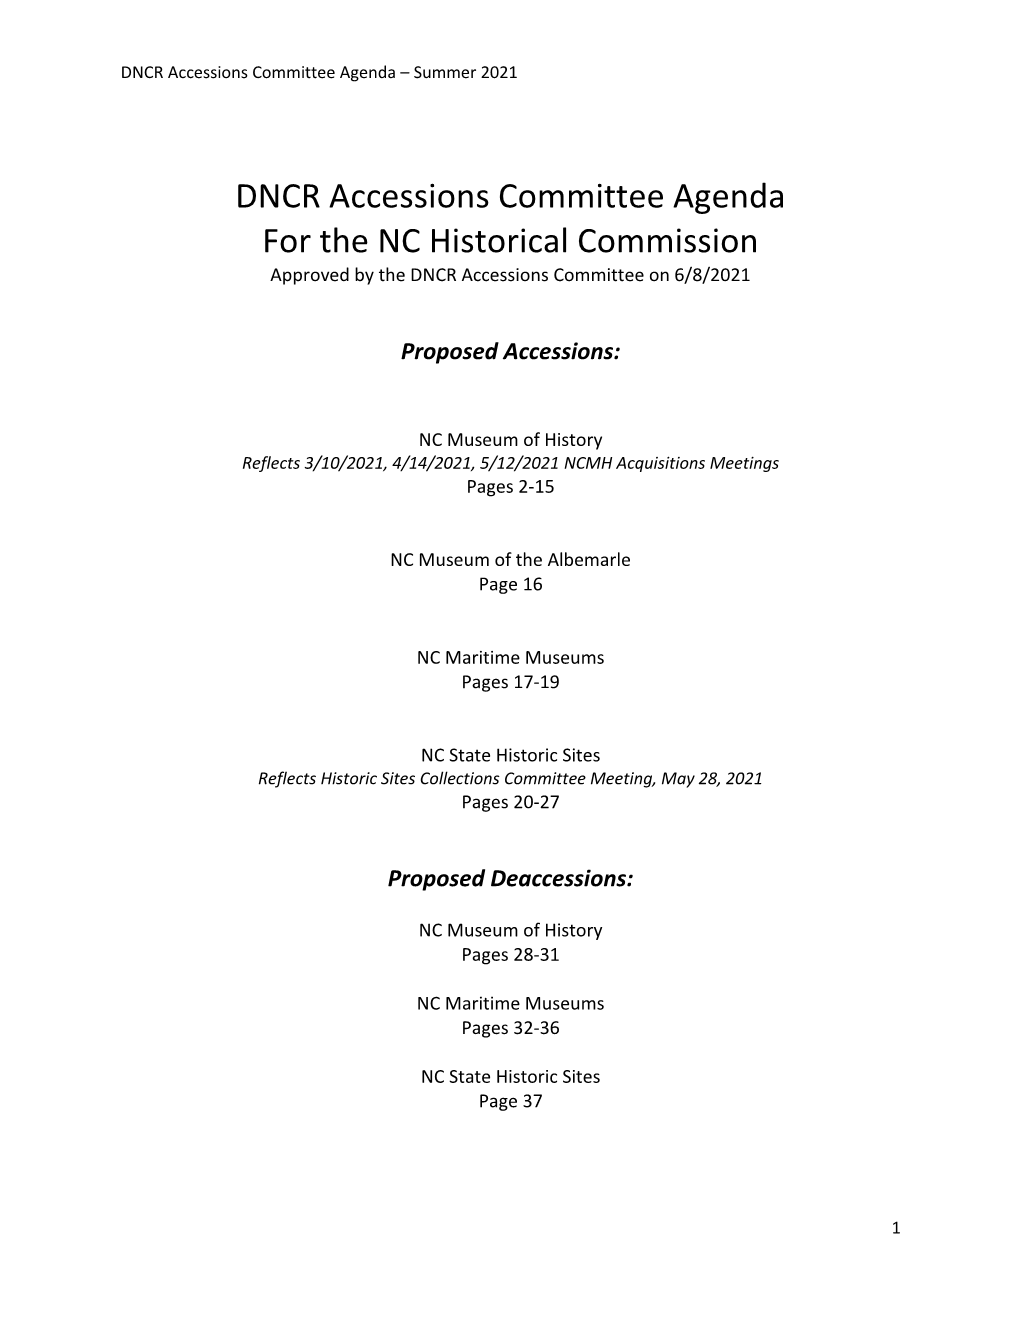 DNCR Accessions Committee Agenda for the NC Historical Commission Approved by the DNCR Accessions Committee on 6/8/2021